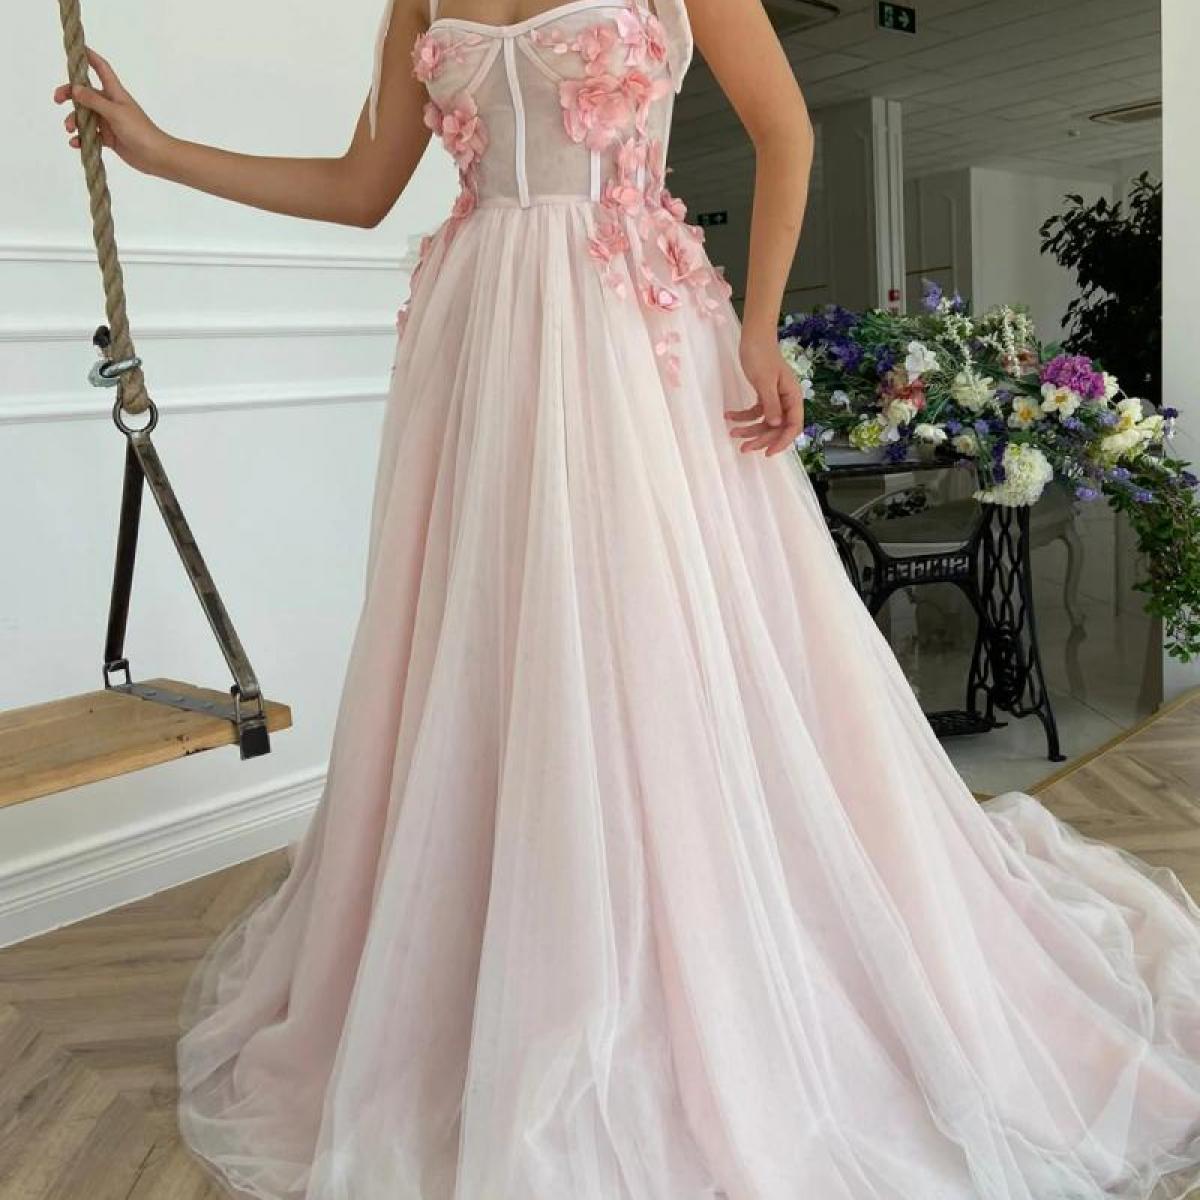 ZSQAW Pink Women Birthday Party Dresses O-neck Sleeveless A-line  Floor-lenght Appliques Tulle Long Prom Gowns (Color : Pink, Size : 14W):  Buy Online at Best Price in UAE - Amazon.ae